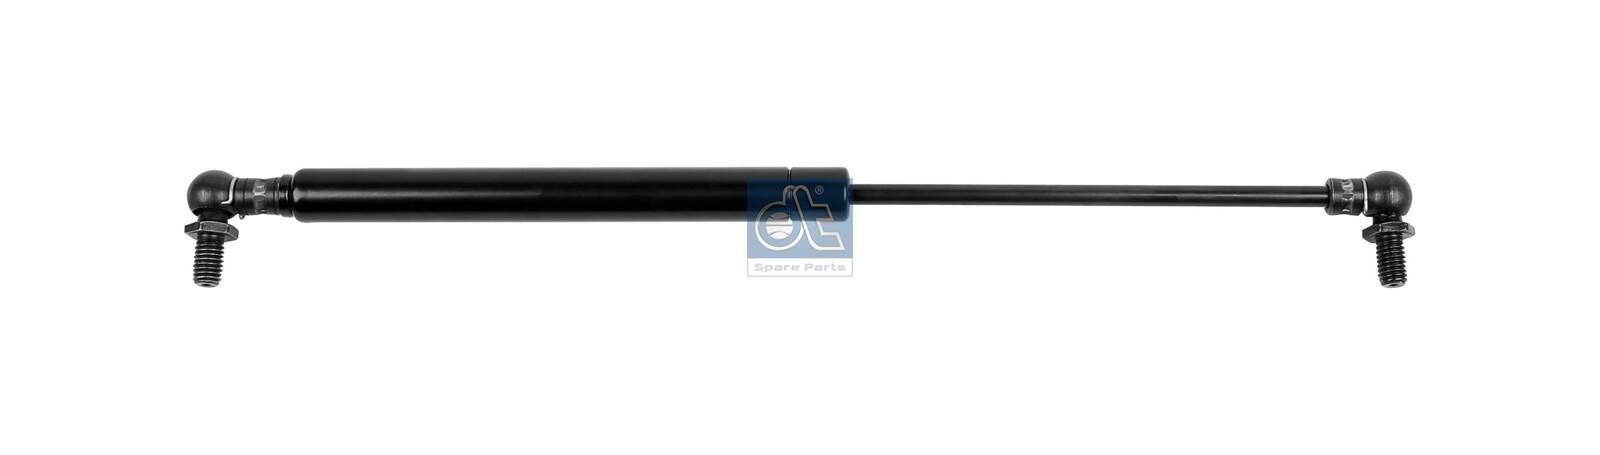 83089 DT Spare Parts 250N, 316 mm Gas Spring 3.80718 buy